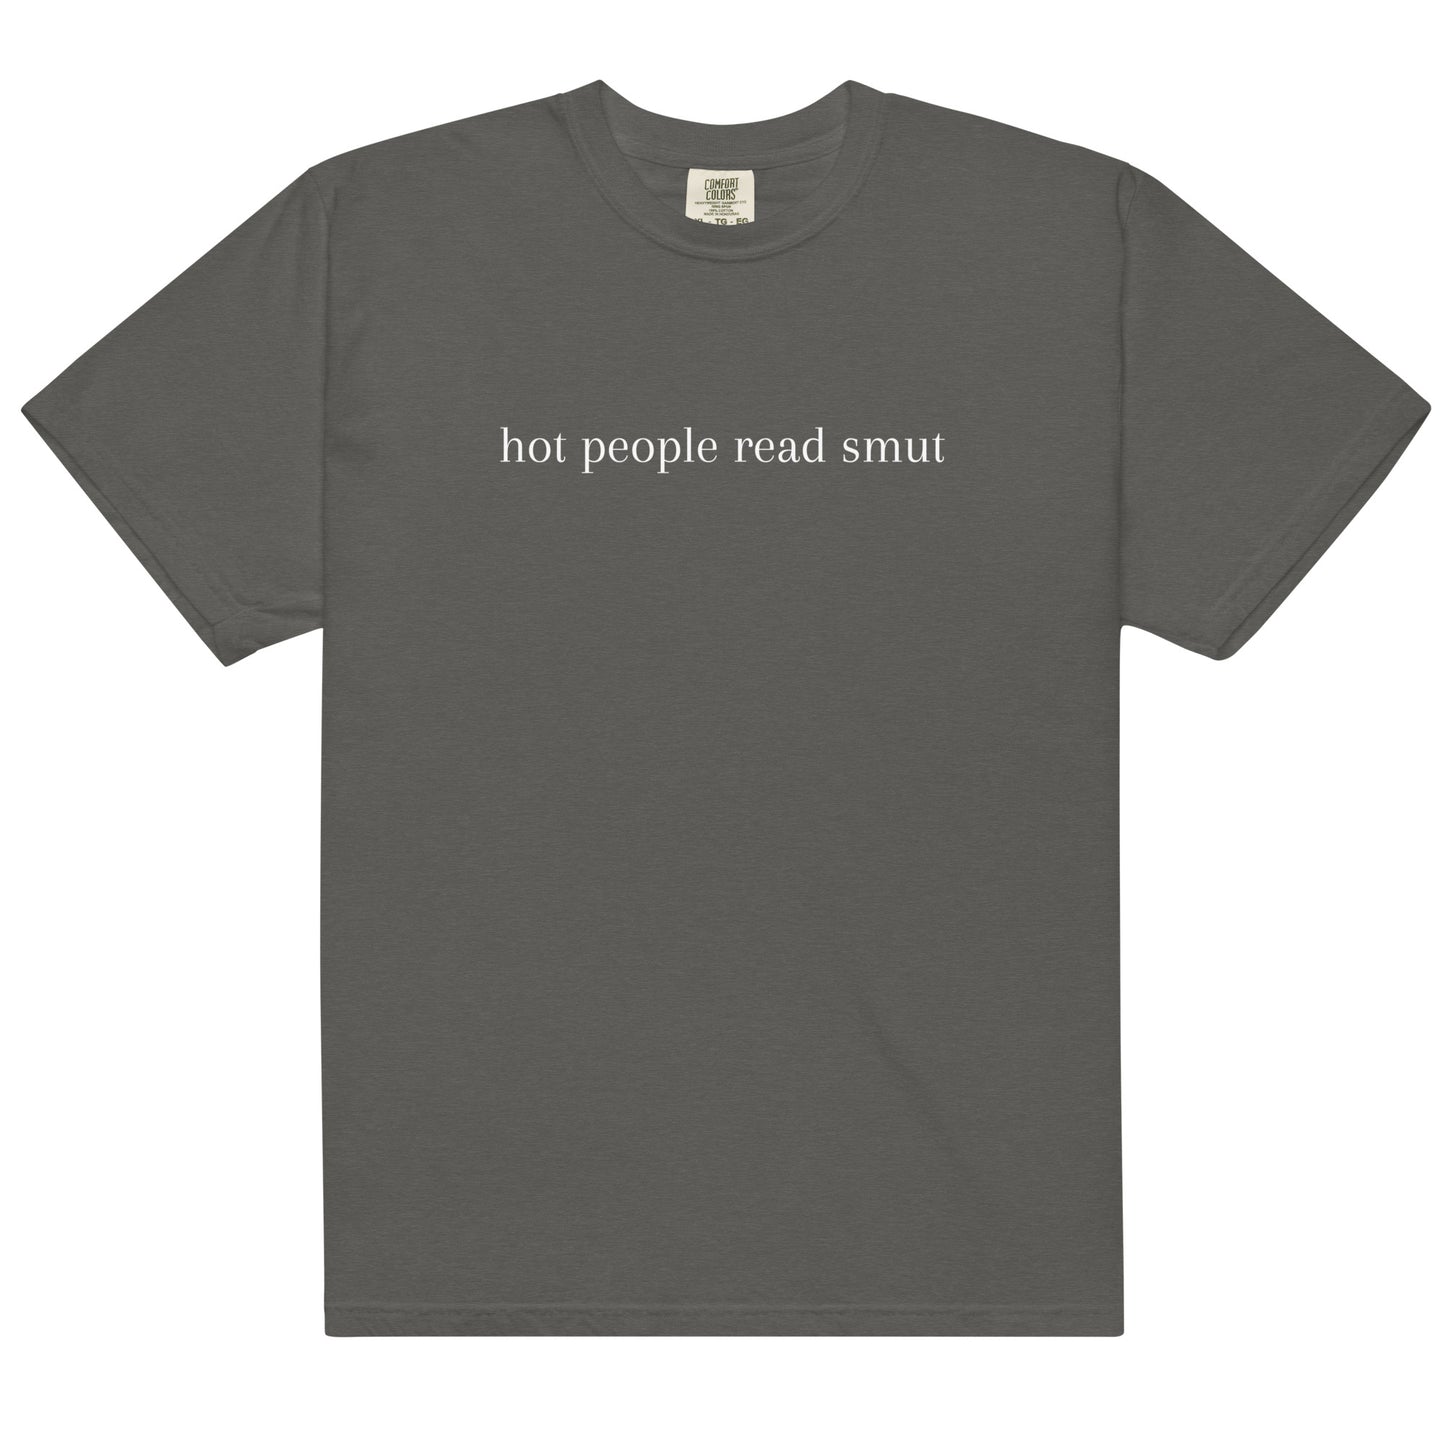 hot people read smut t-shirt